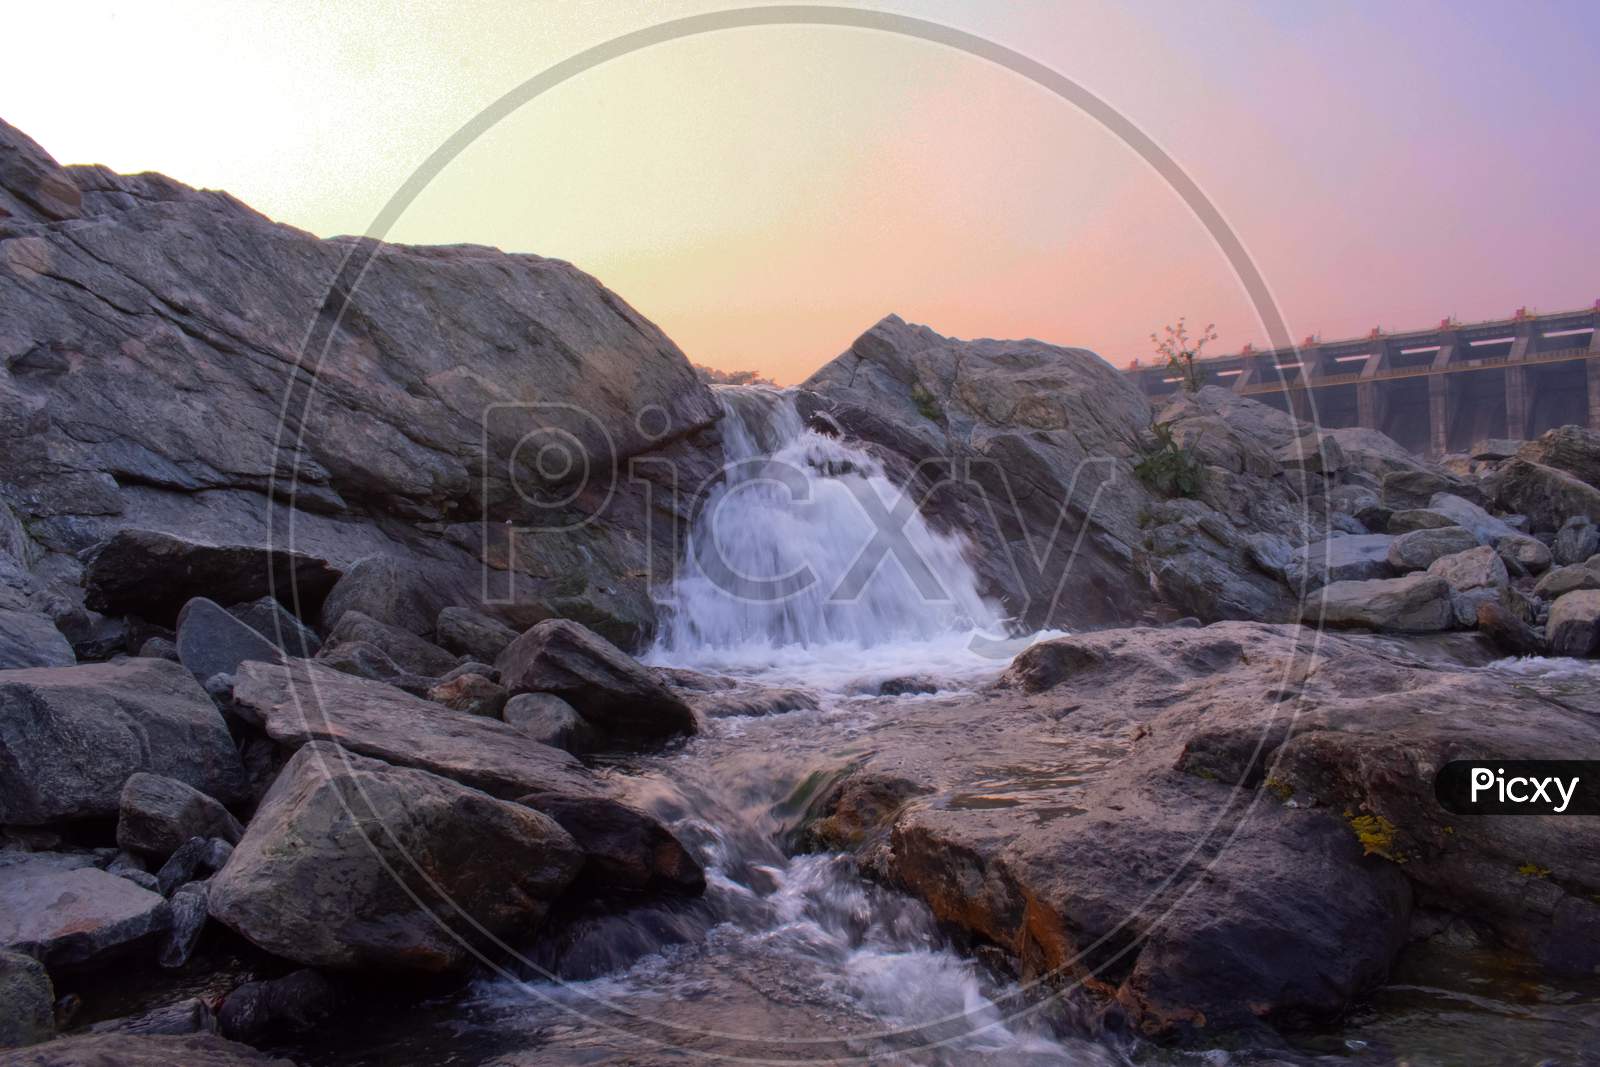 A Small Waterfall Flowing Between The Rocks During Sunset